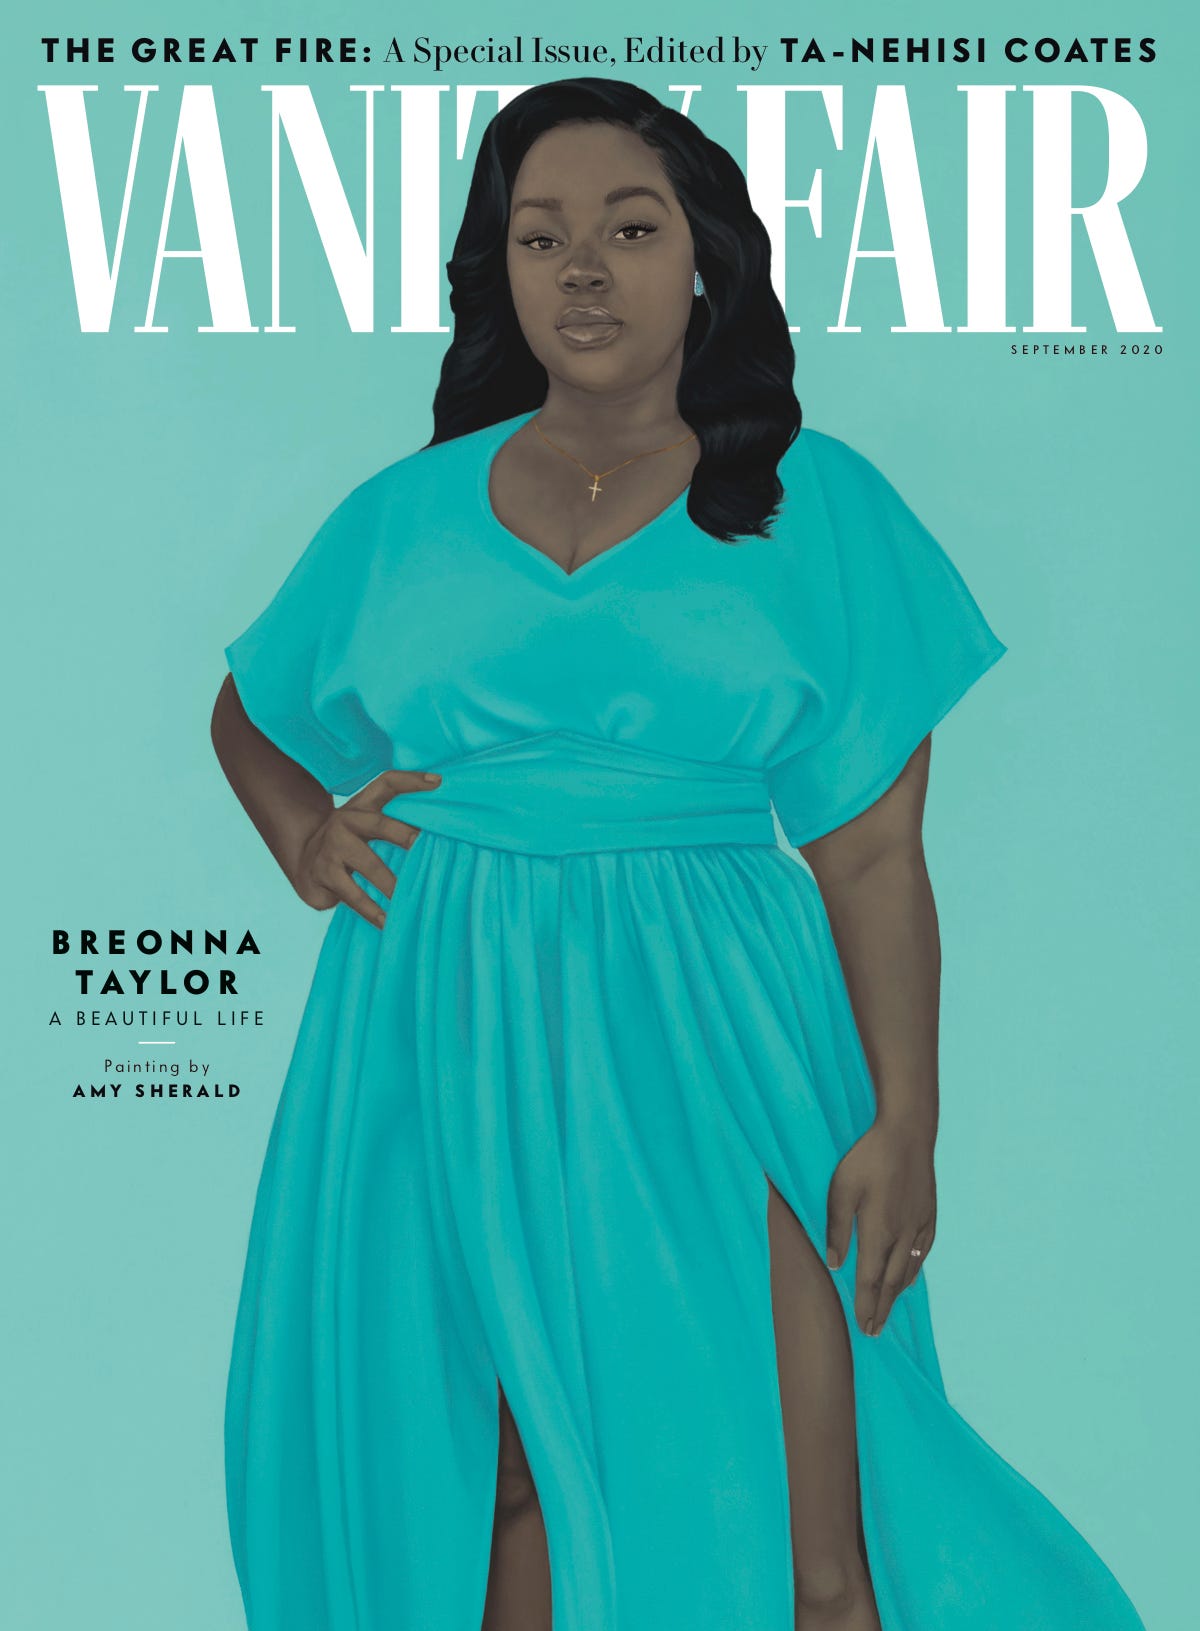 Breonna Taylor Portrait by Amy Sherald on the cover of Vanity Fair, September 2020 Issue in dress by Jibri